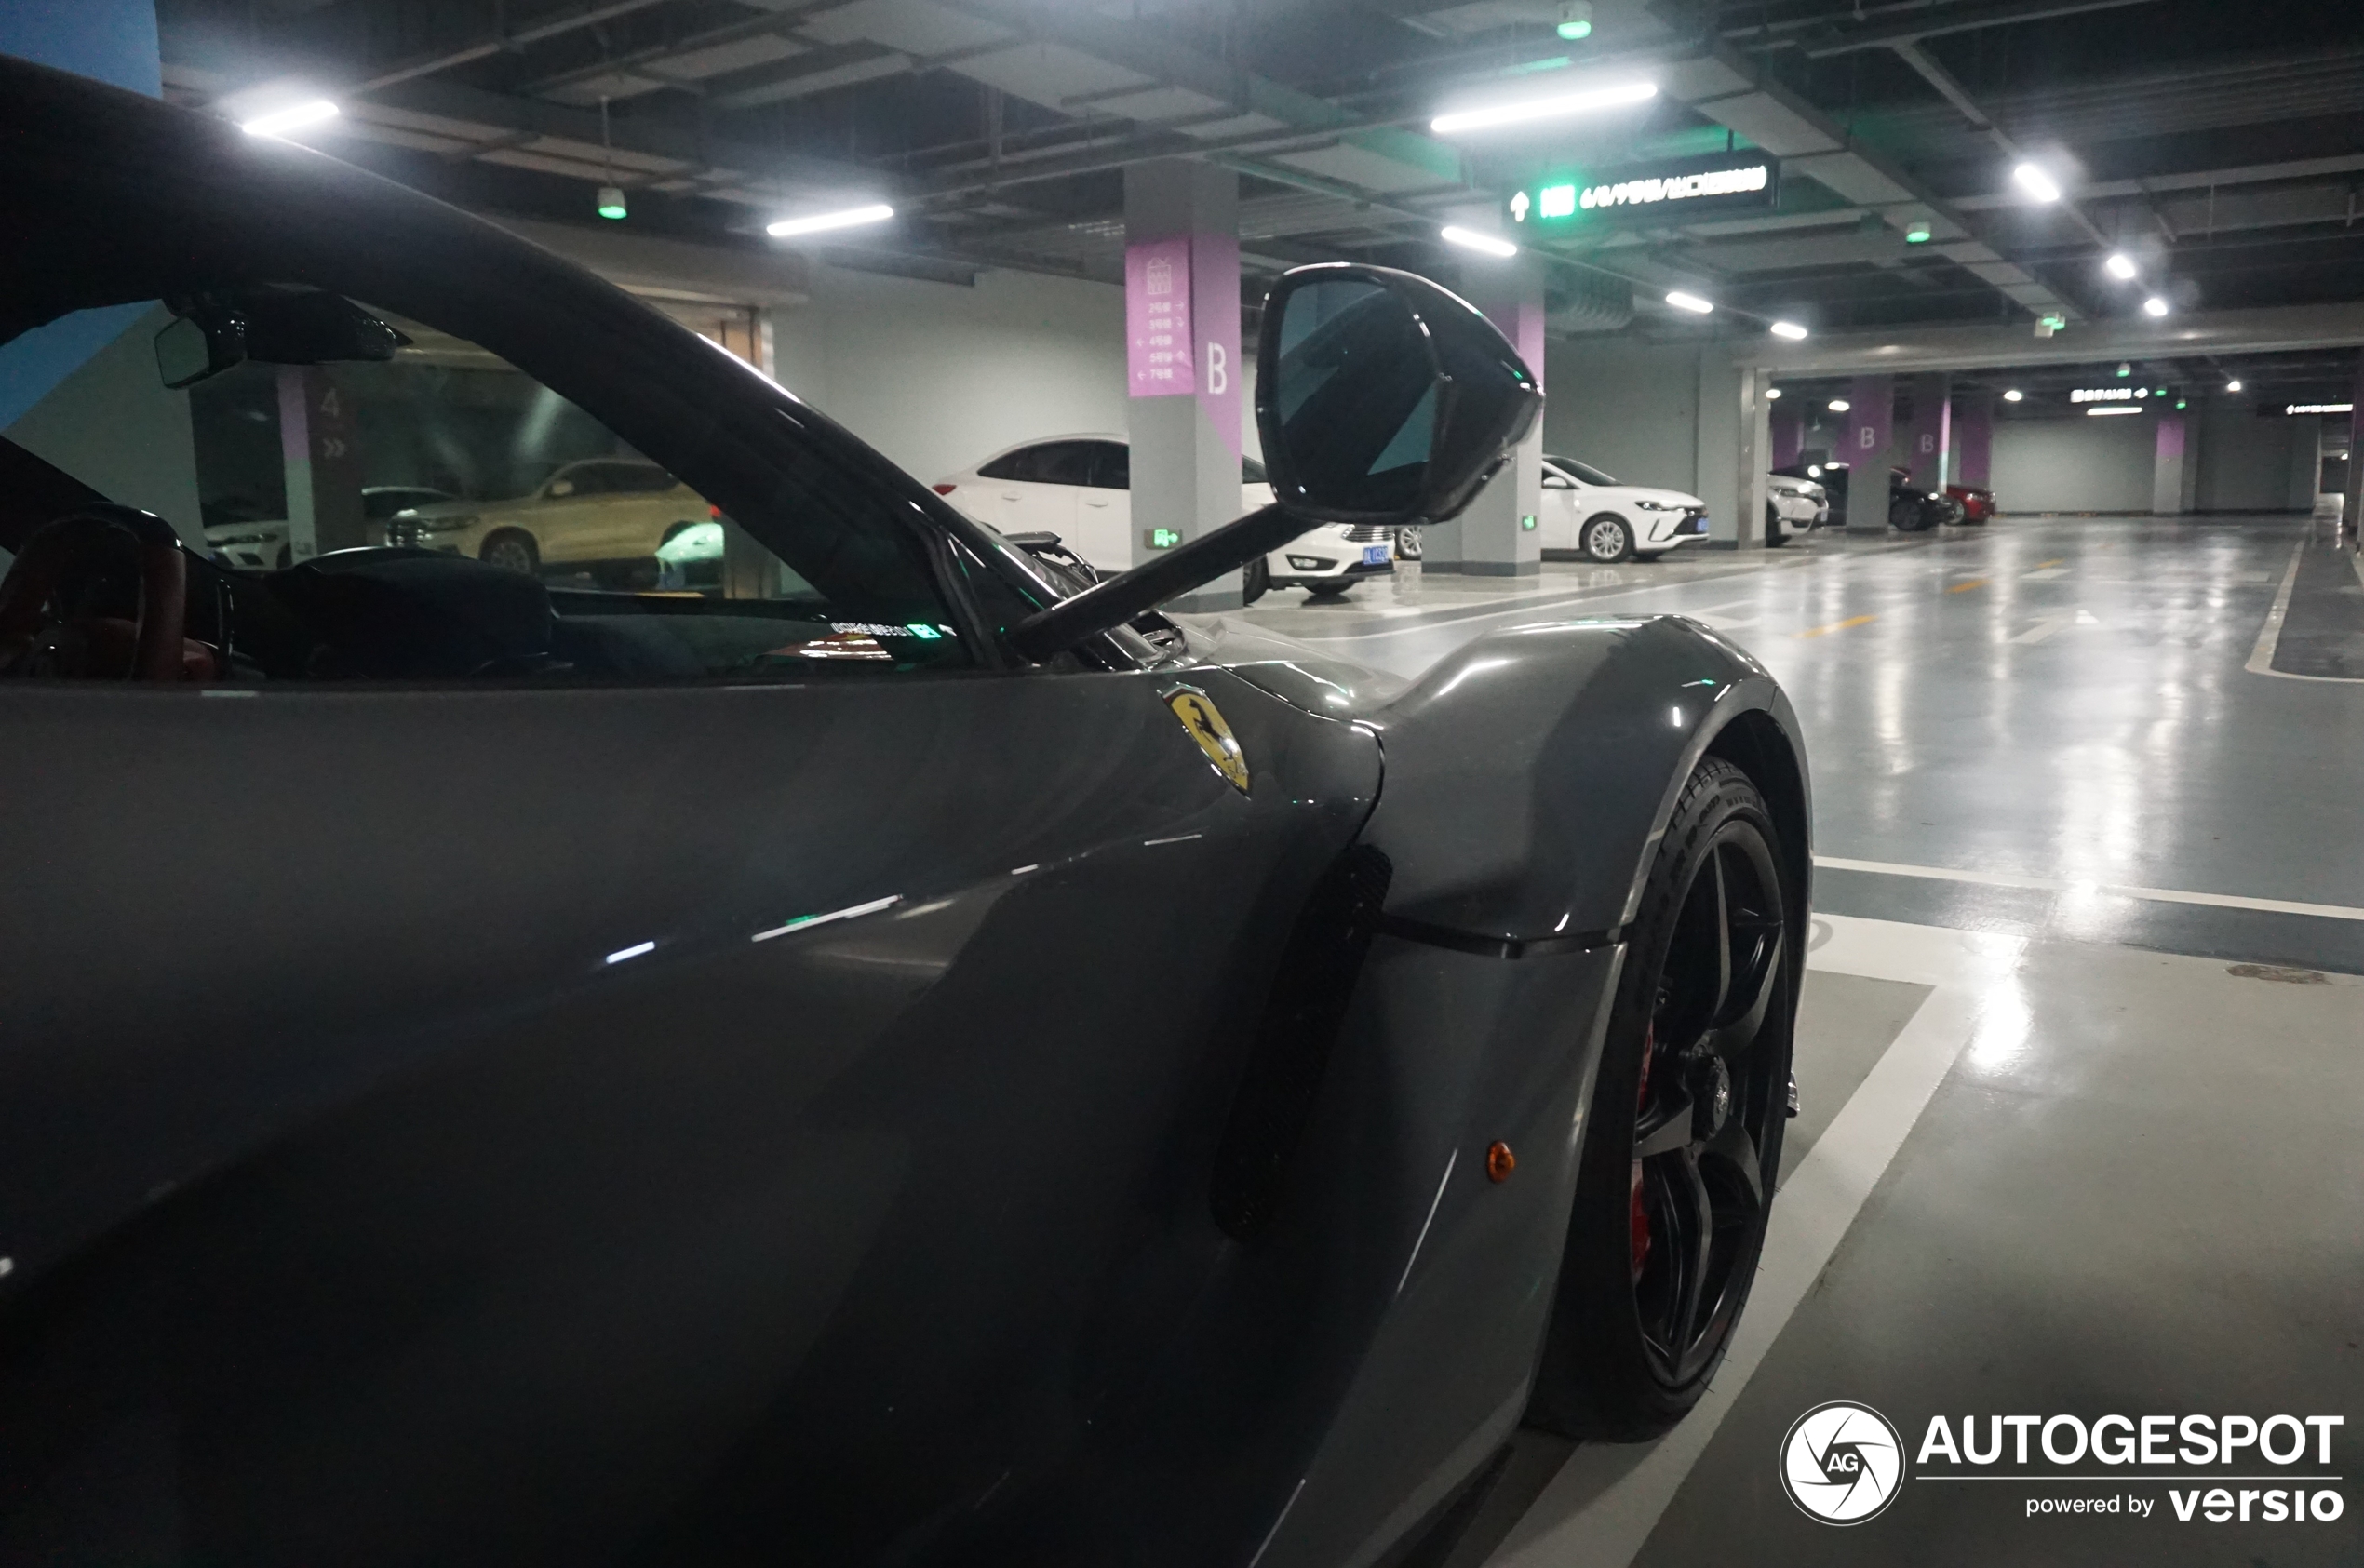 A second laferrari stands in the depths of Hangzhou